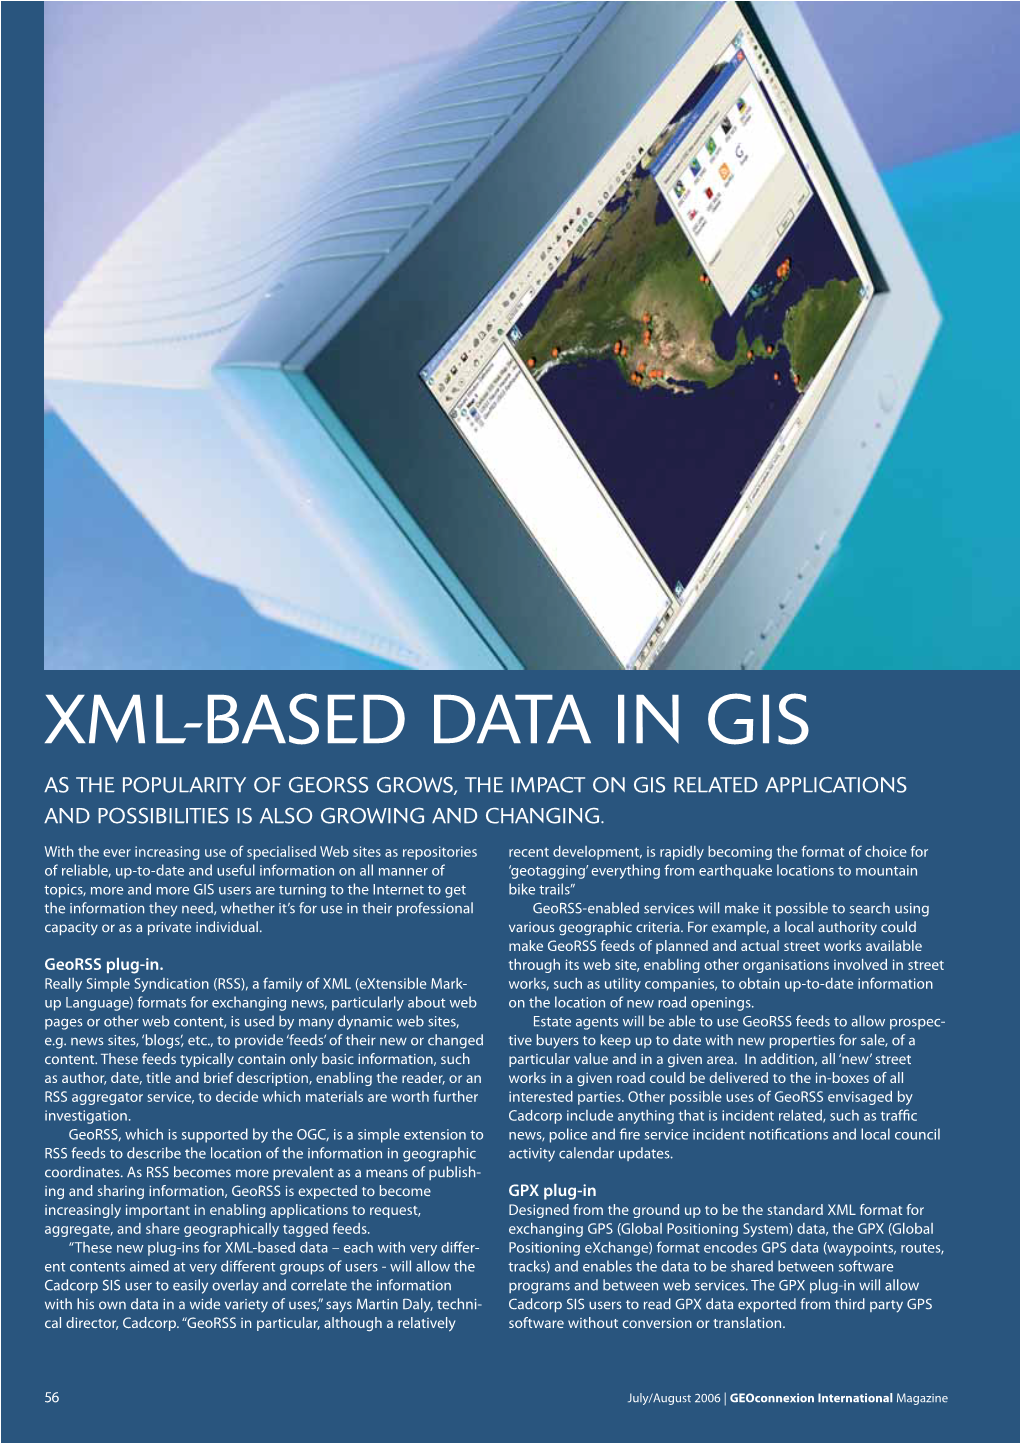 Xml-Based Data in Gis As the Popularity of Georss Grows, the Impact on Gis Related Applications and Possibilities Is Also Growing and Changing